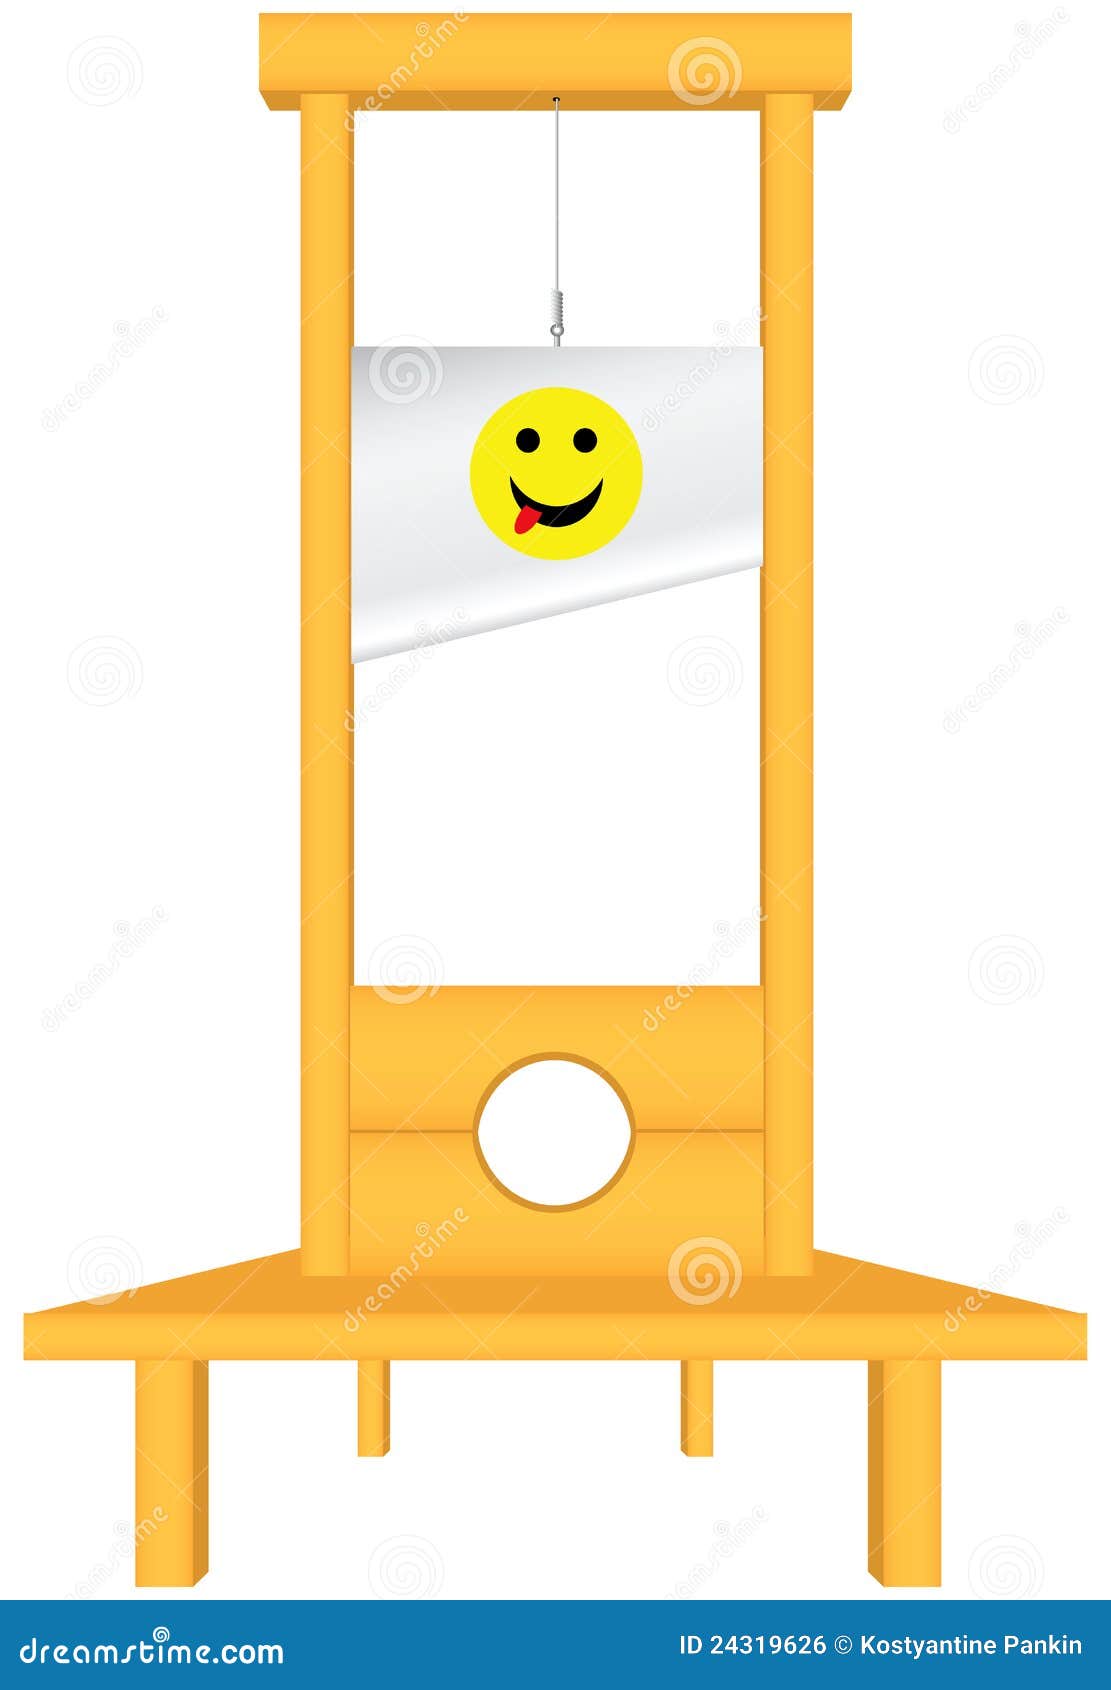 clipart guillotine pictures - photo #50